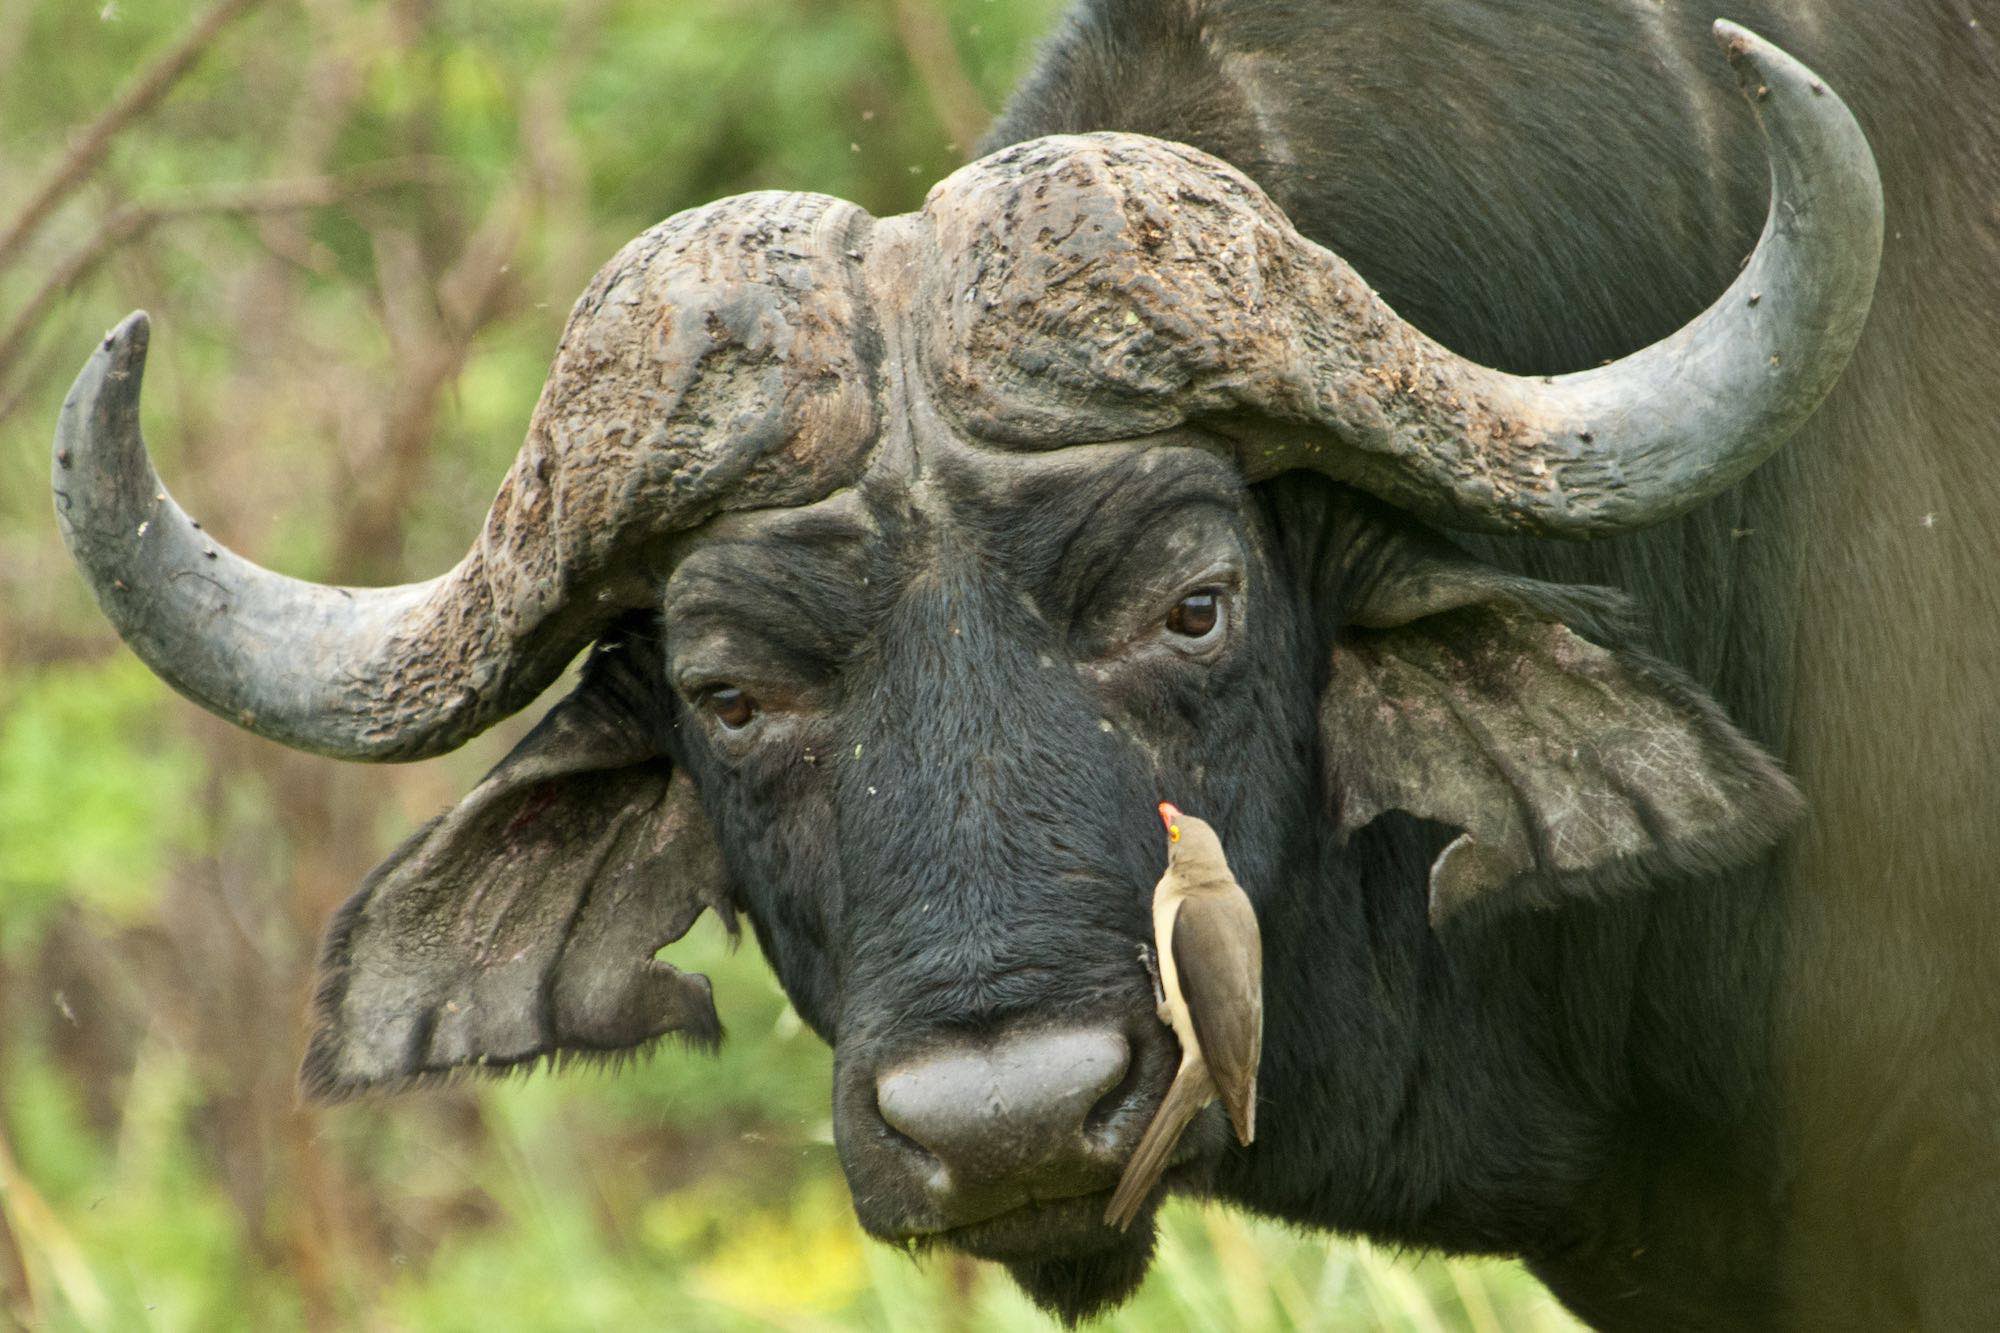 An oxpecker gazes at the buffalo it has perched on, while the buffalo stares into the camera.